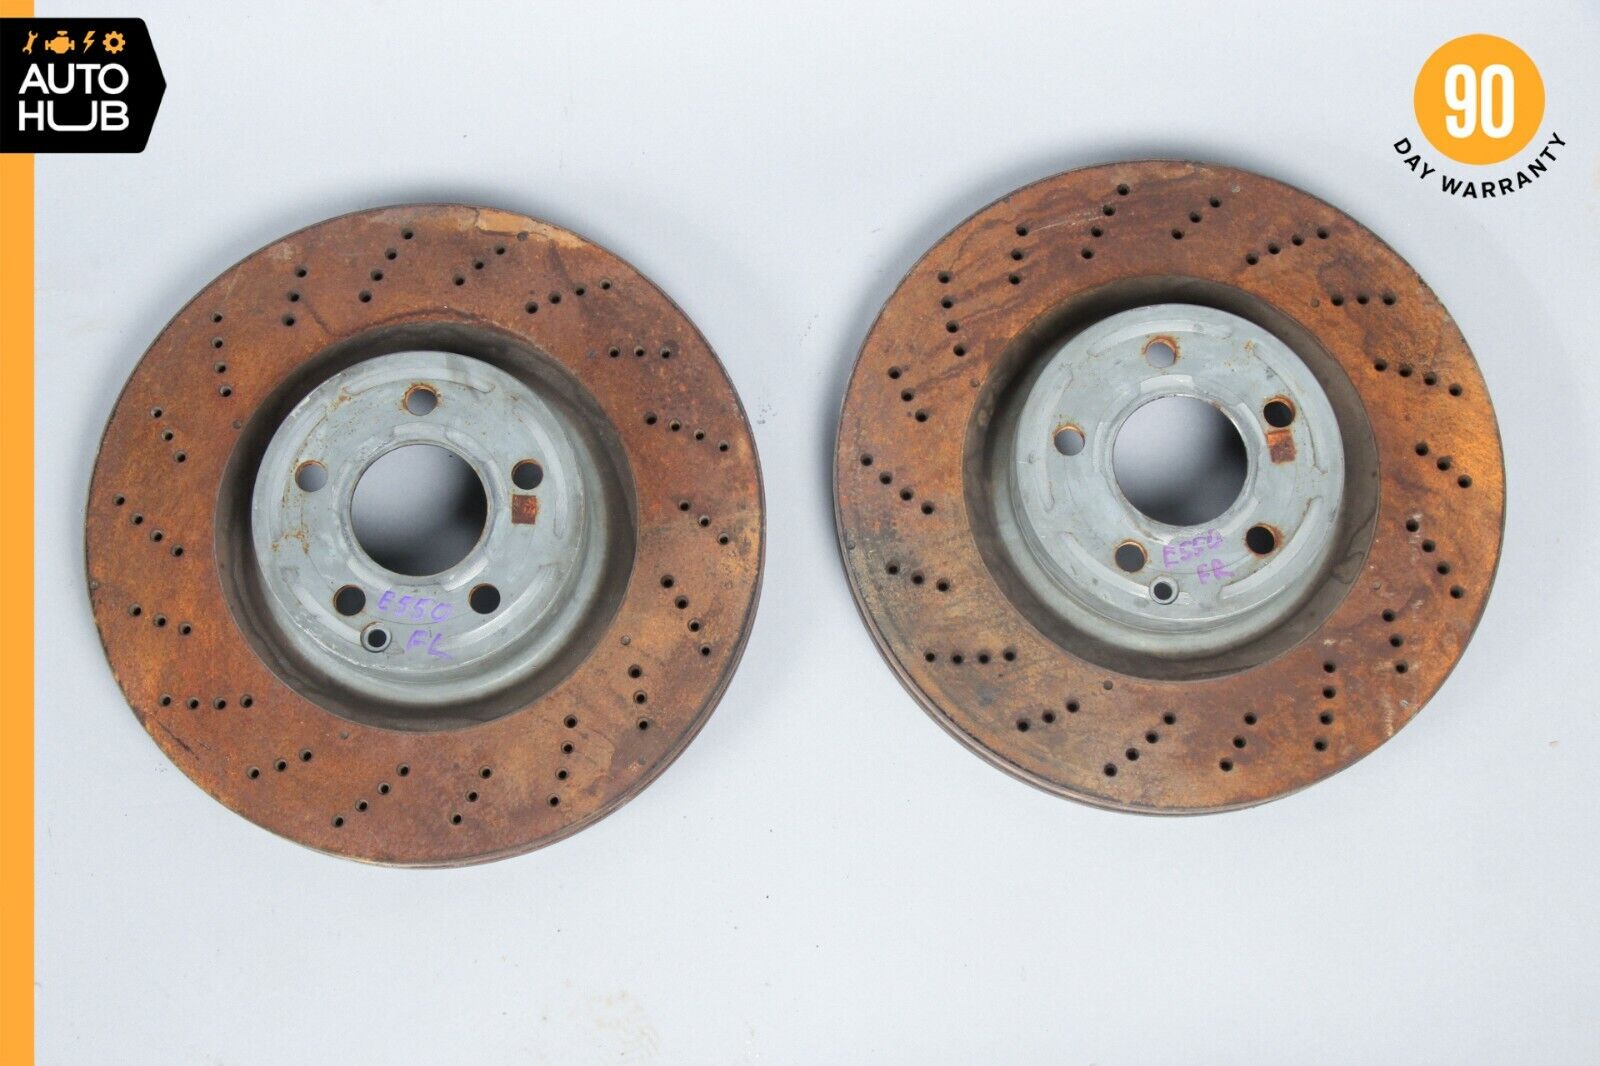 Mercedes W207 E550 C250 Coupe Front Brake Rotors Disc Left and Right Set OEM